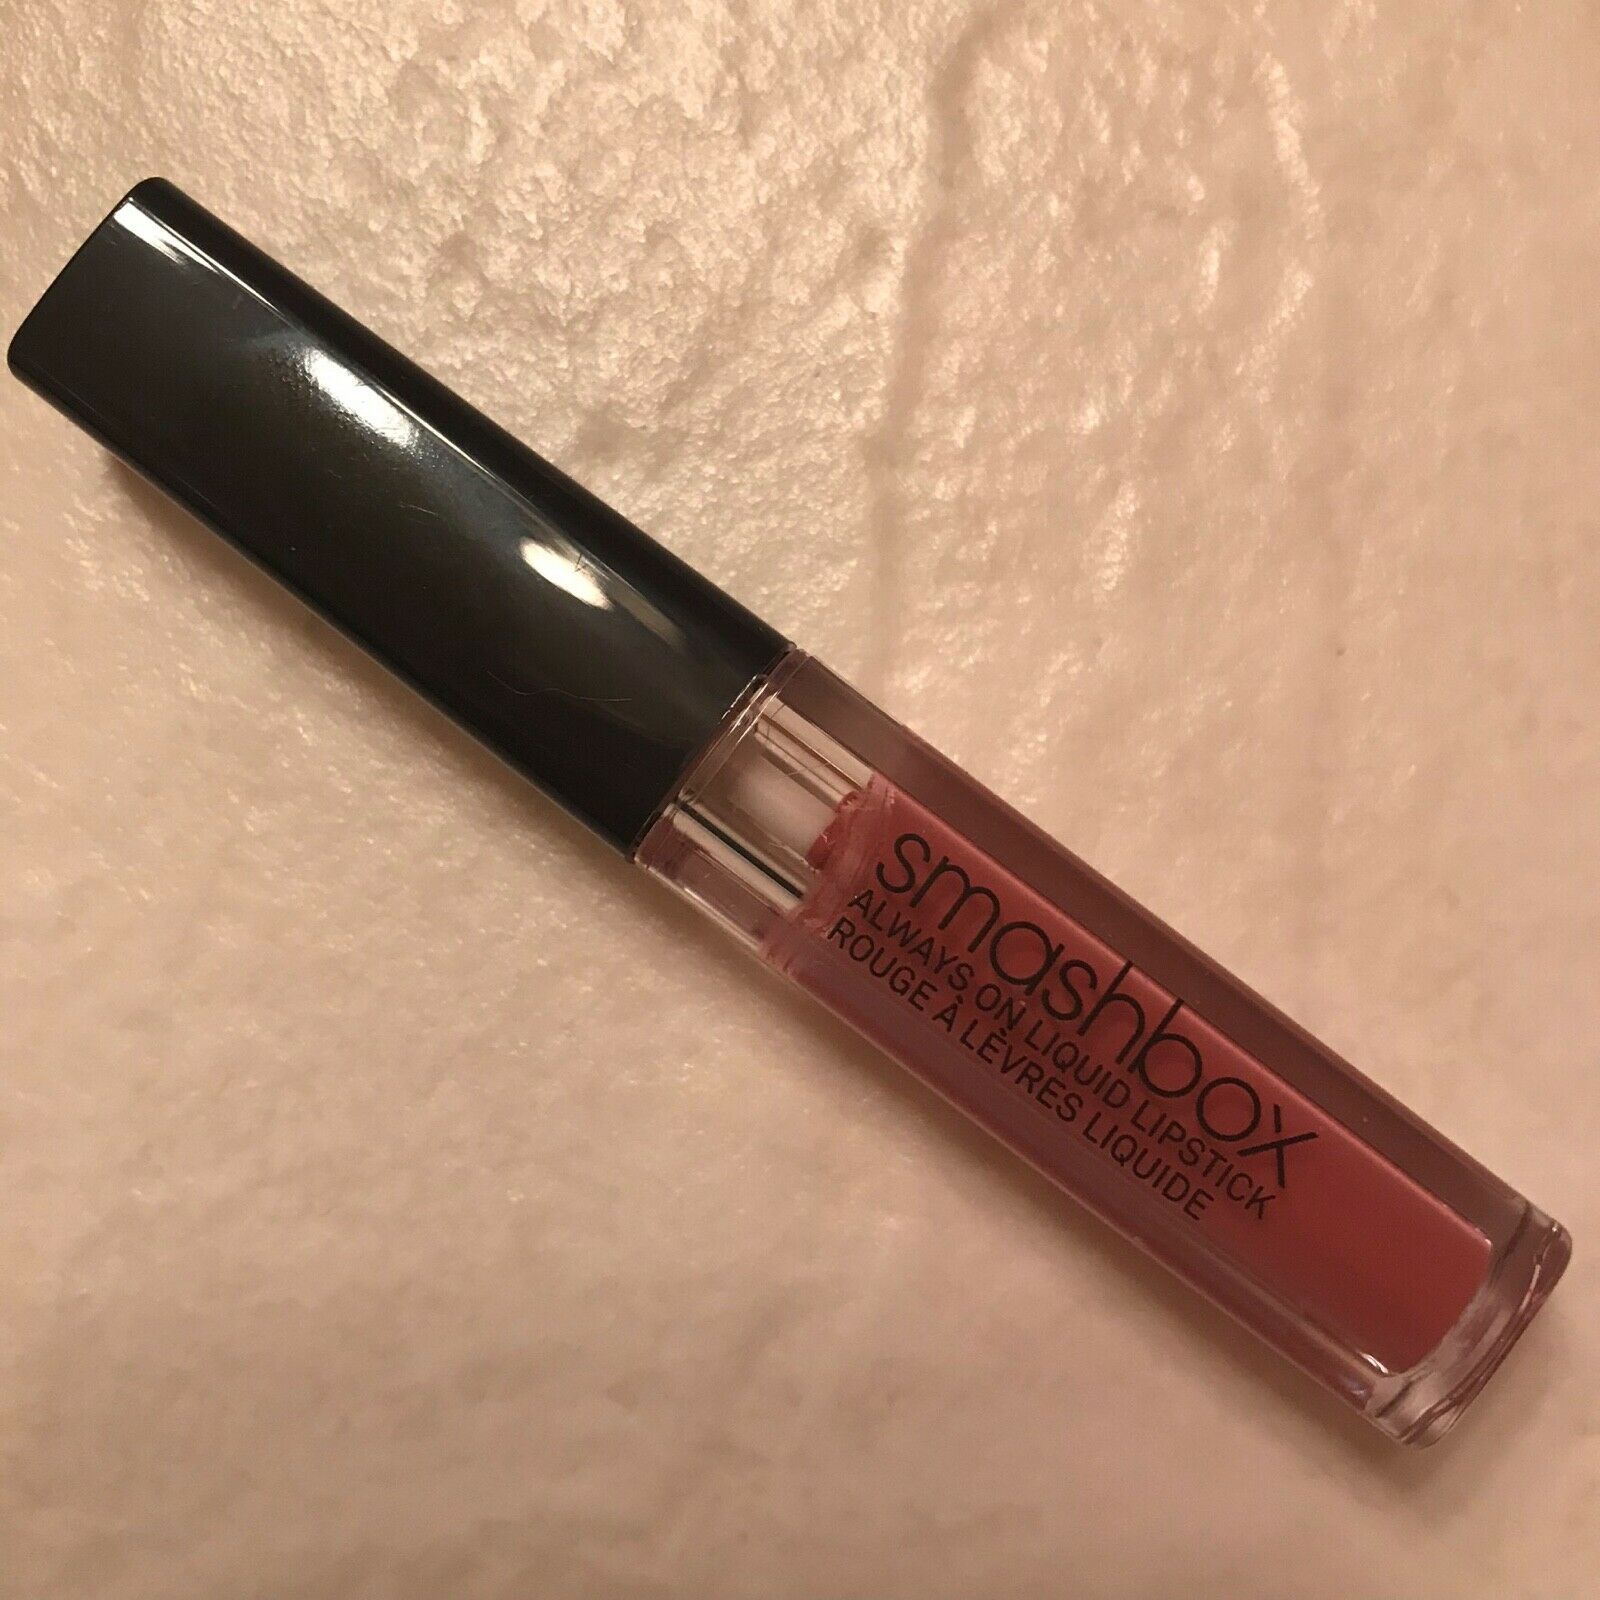 Primary image for Smashbox Babe Alert Always on Liquid Lipstick Color Nude Rose Travel Size New